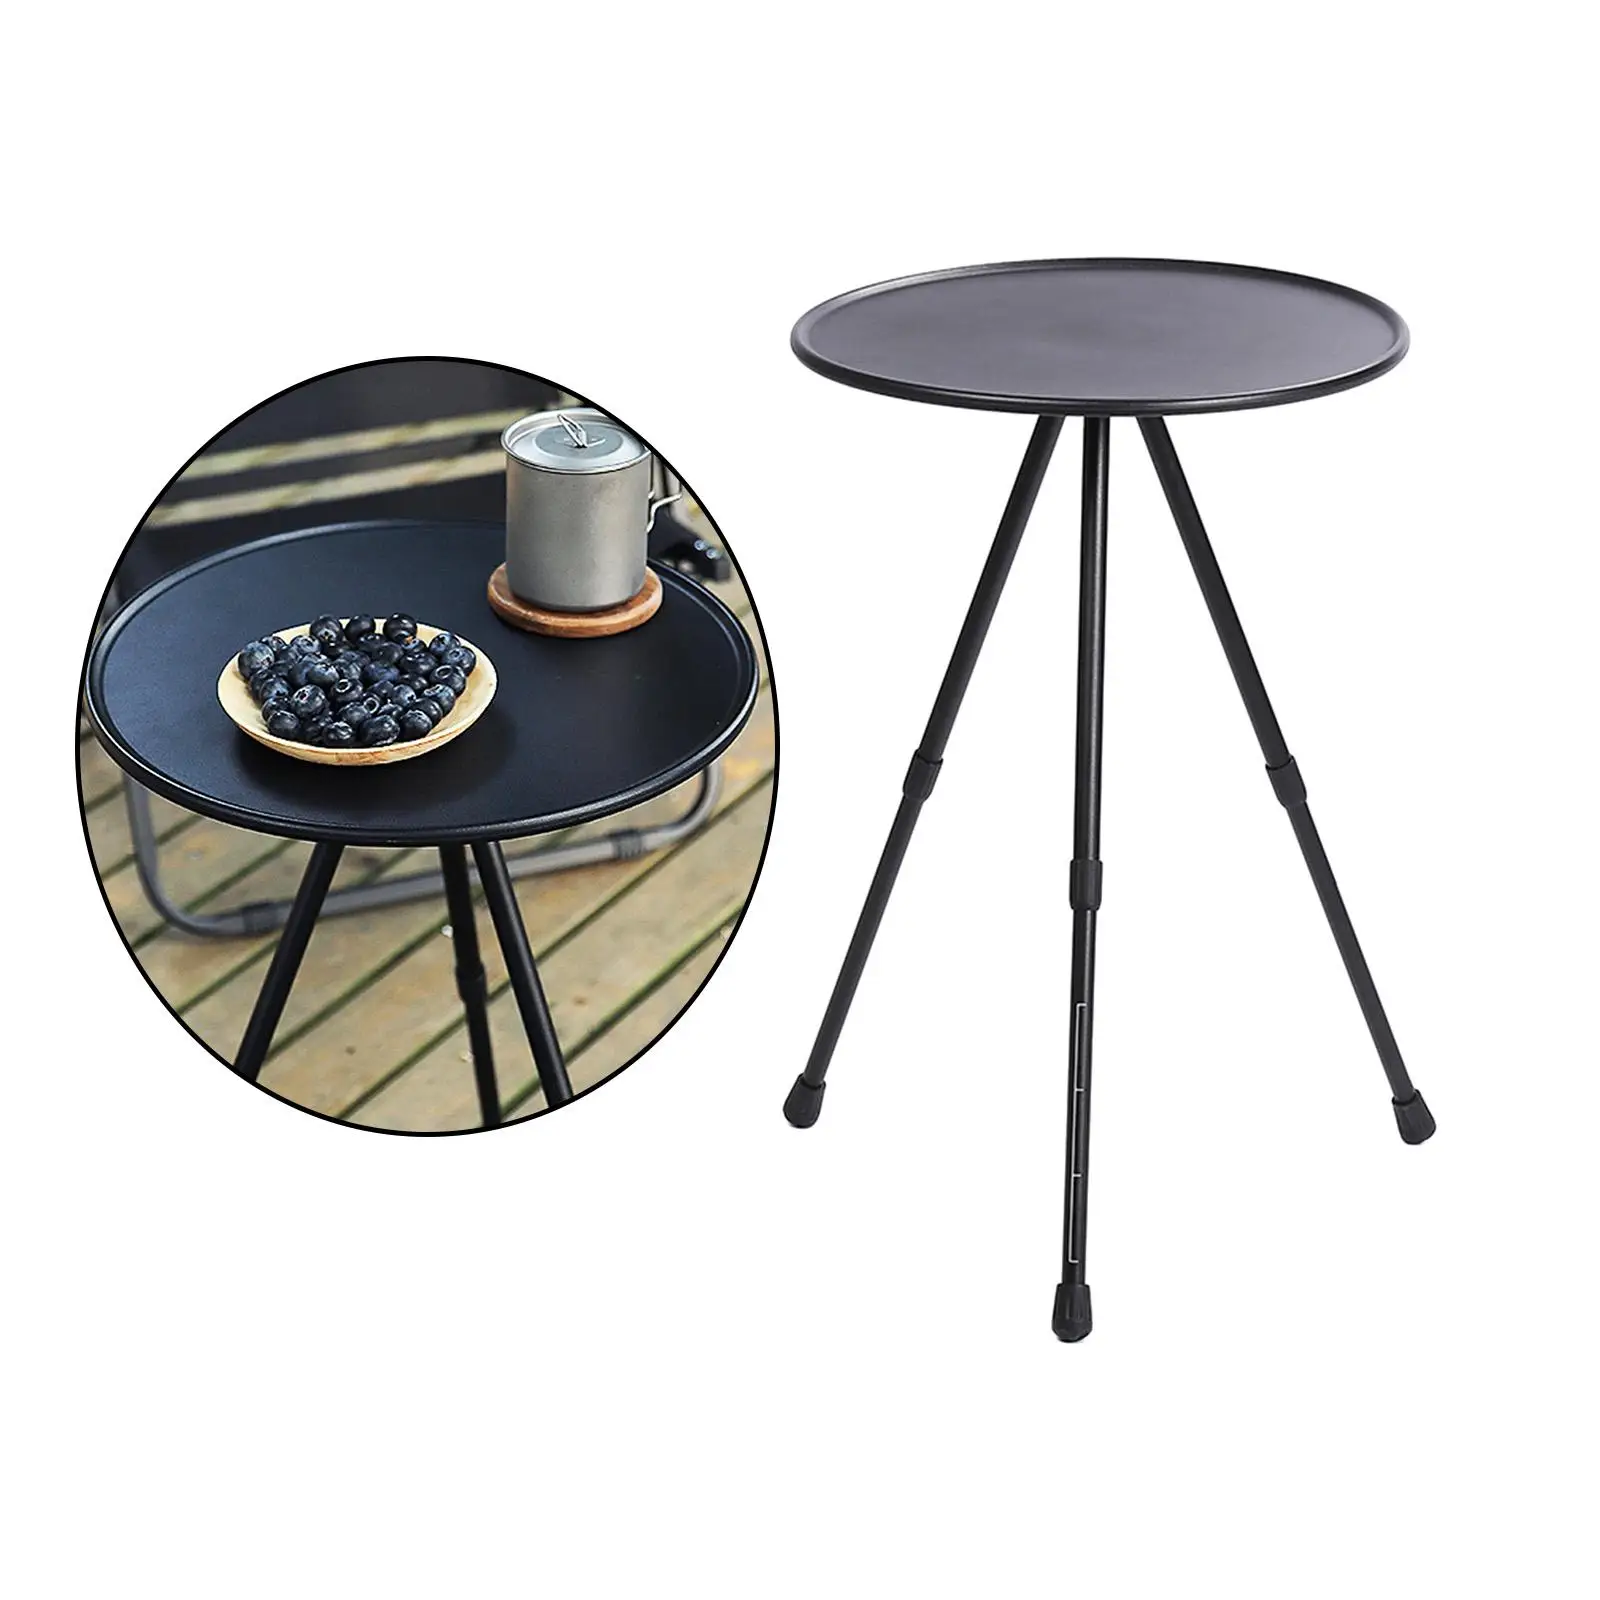 Foldable Camping Table Retractable Portable Outdoor Camping Three-Legged Dining Table for Beach Barbecue Camping Outdoor Picnic